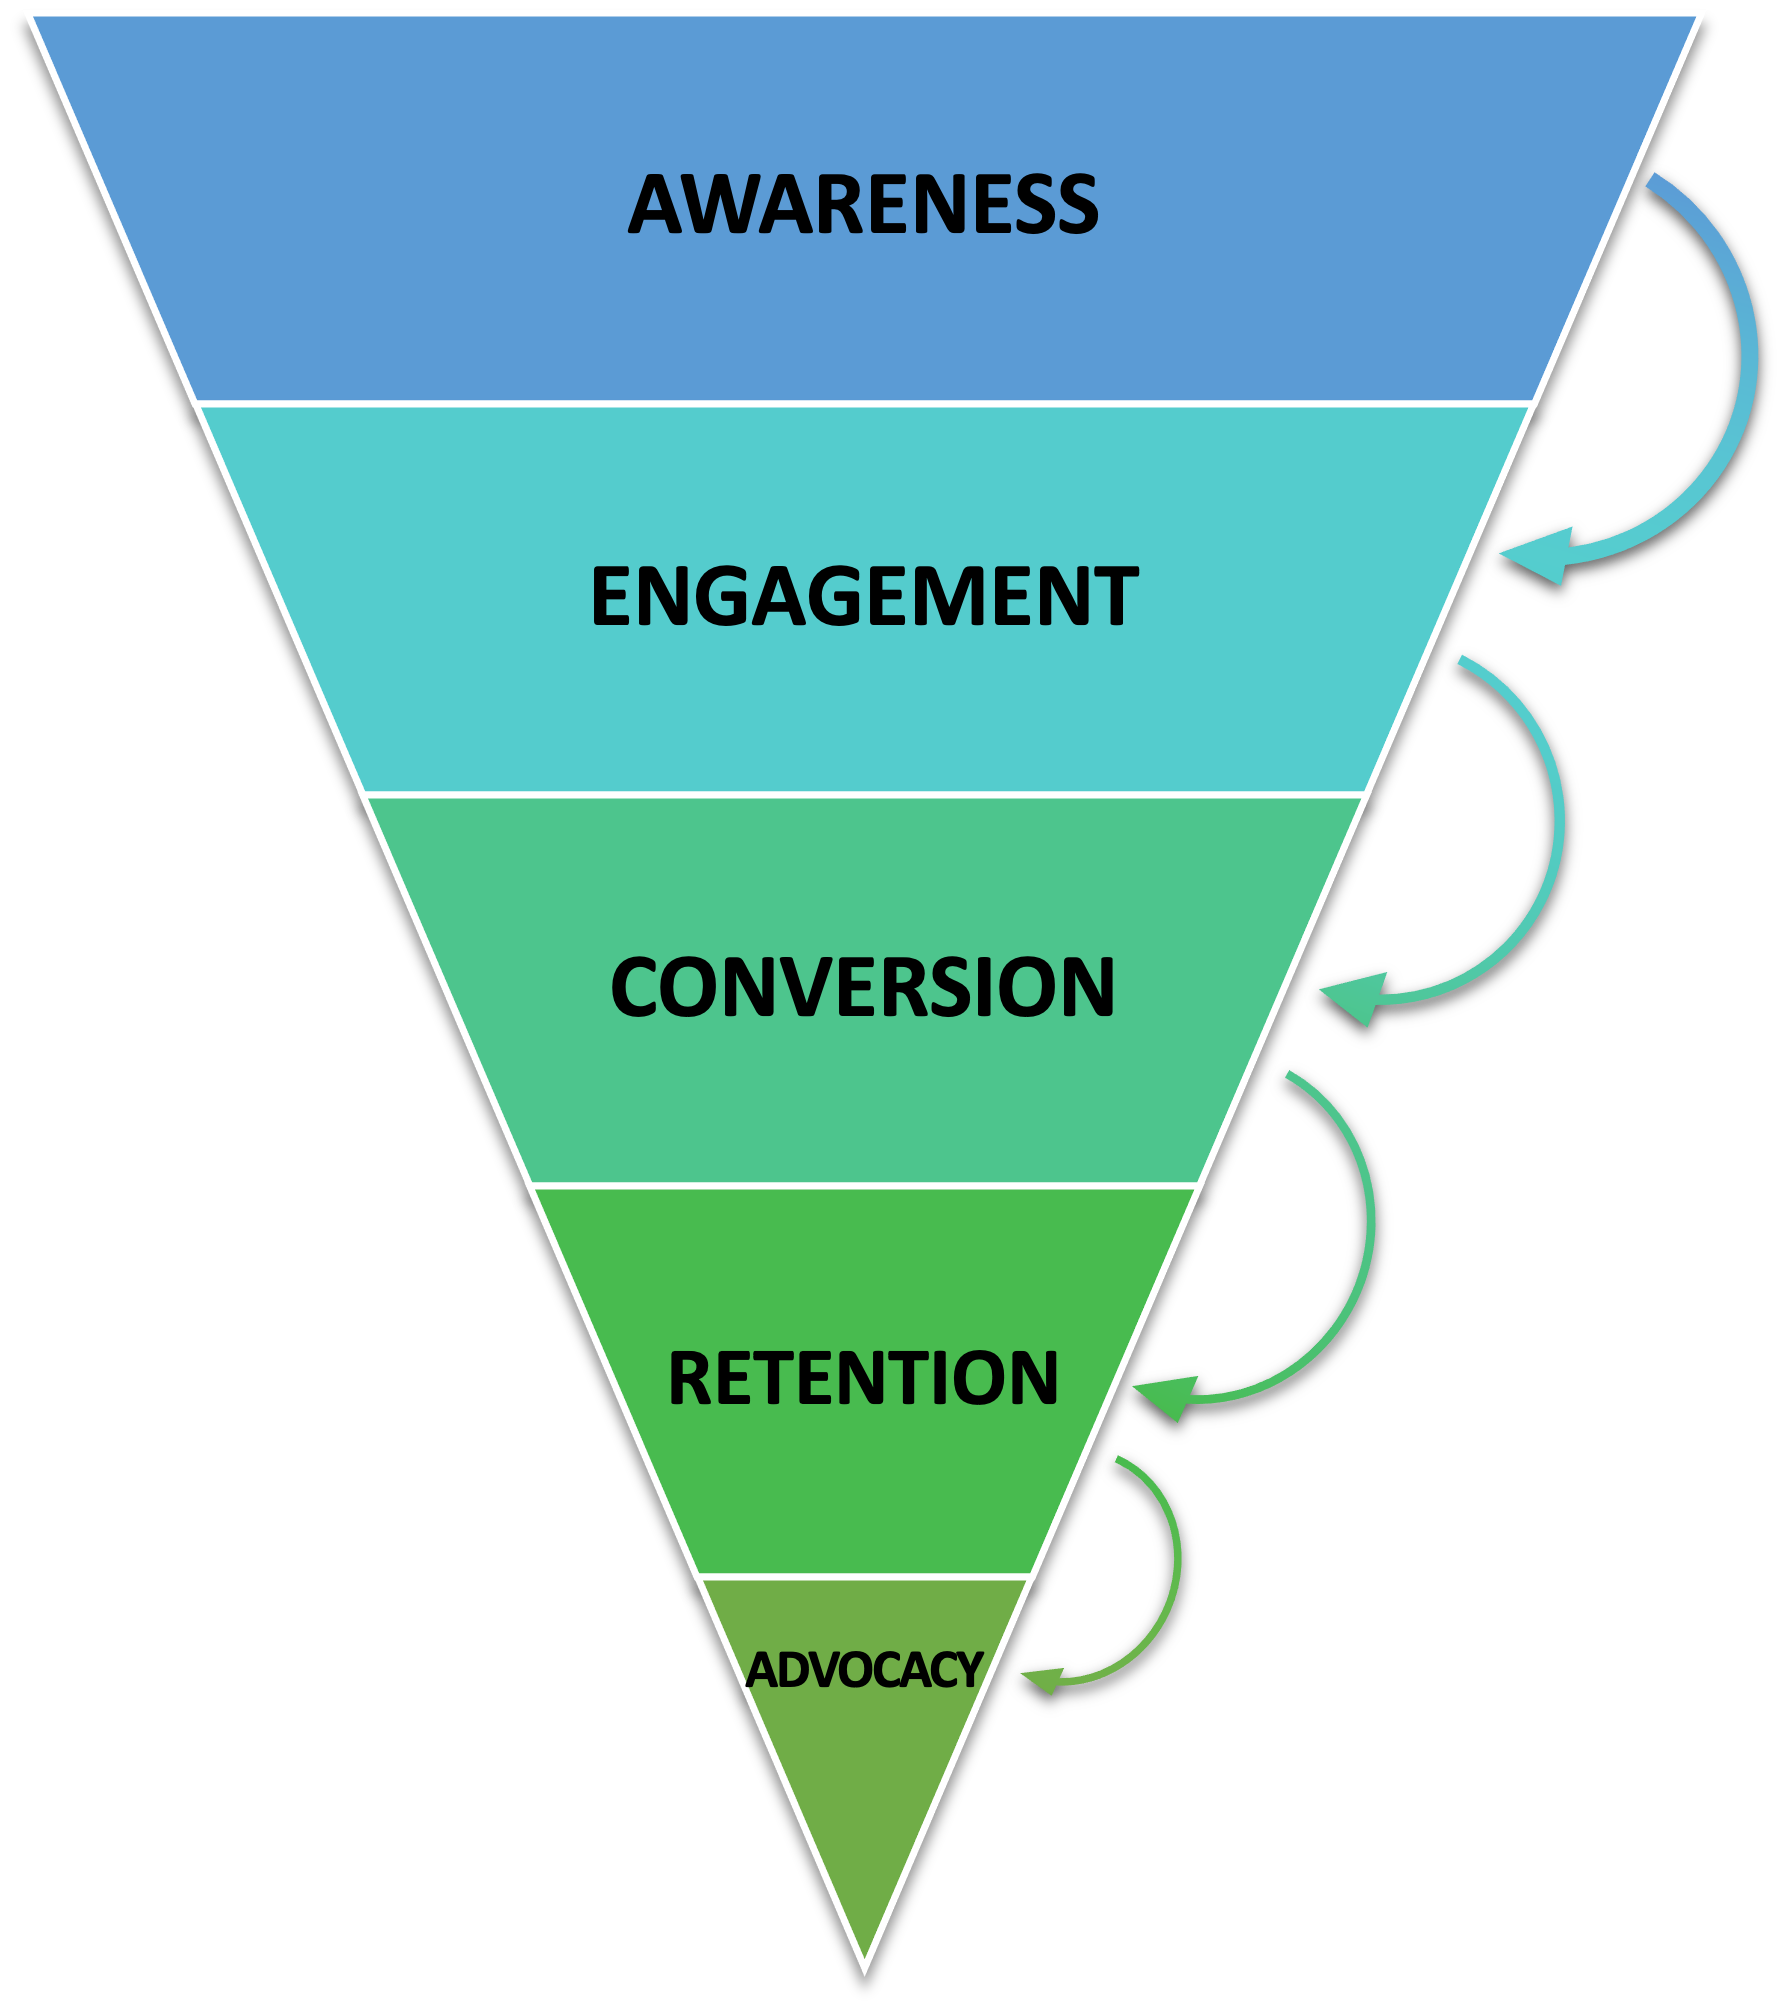 The Conversion Funnel: Awareness to engagement to conversion to retention to advocacy.